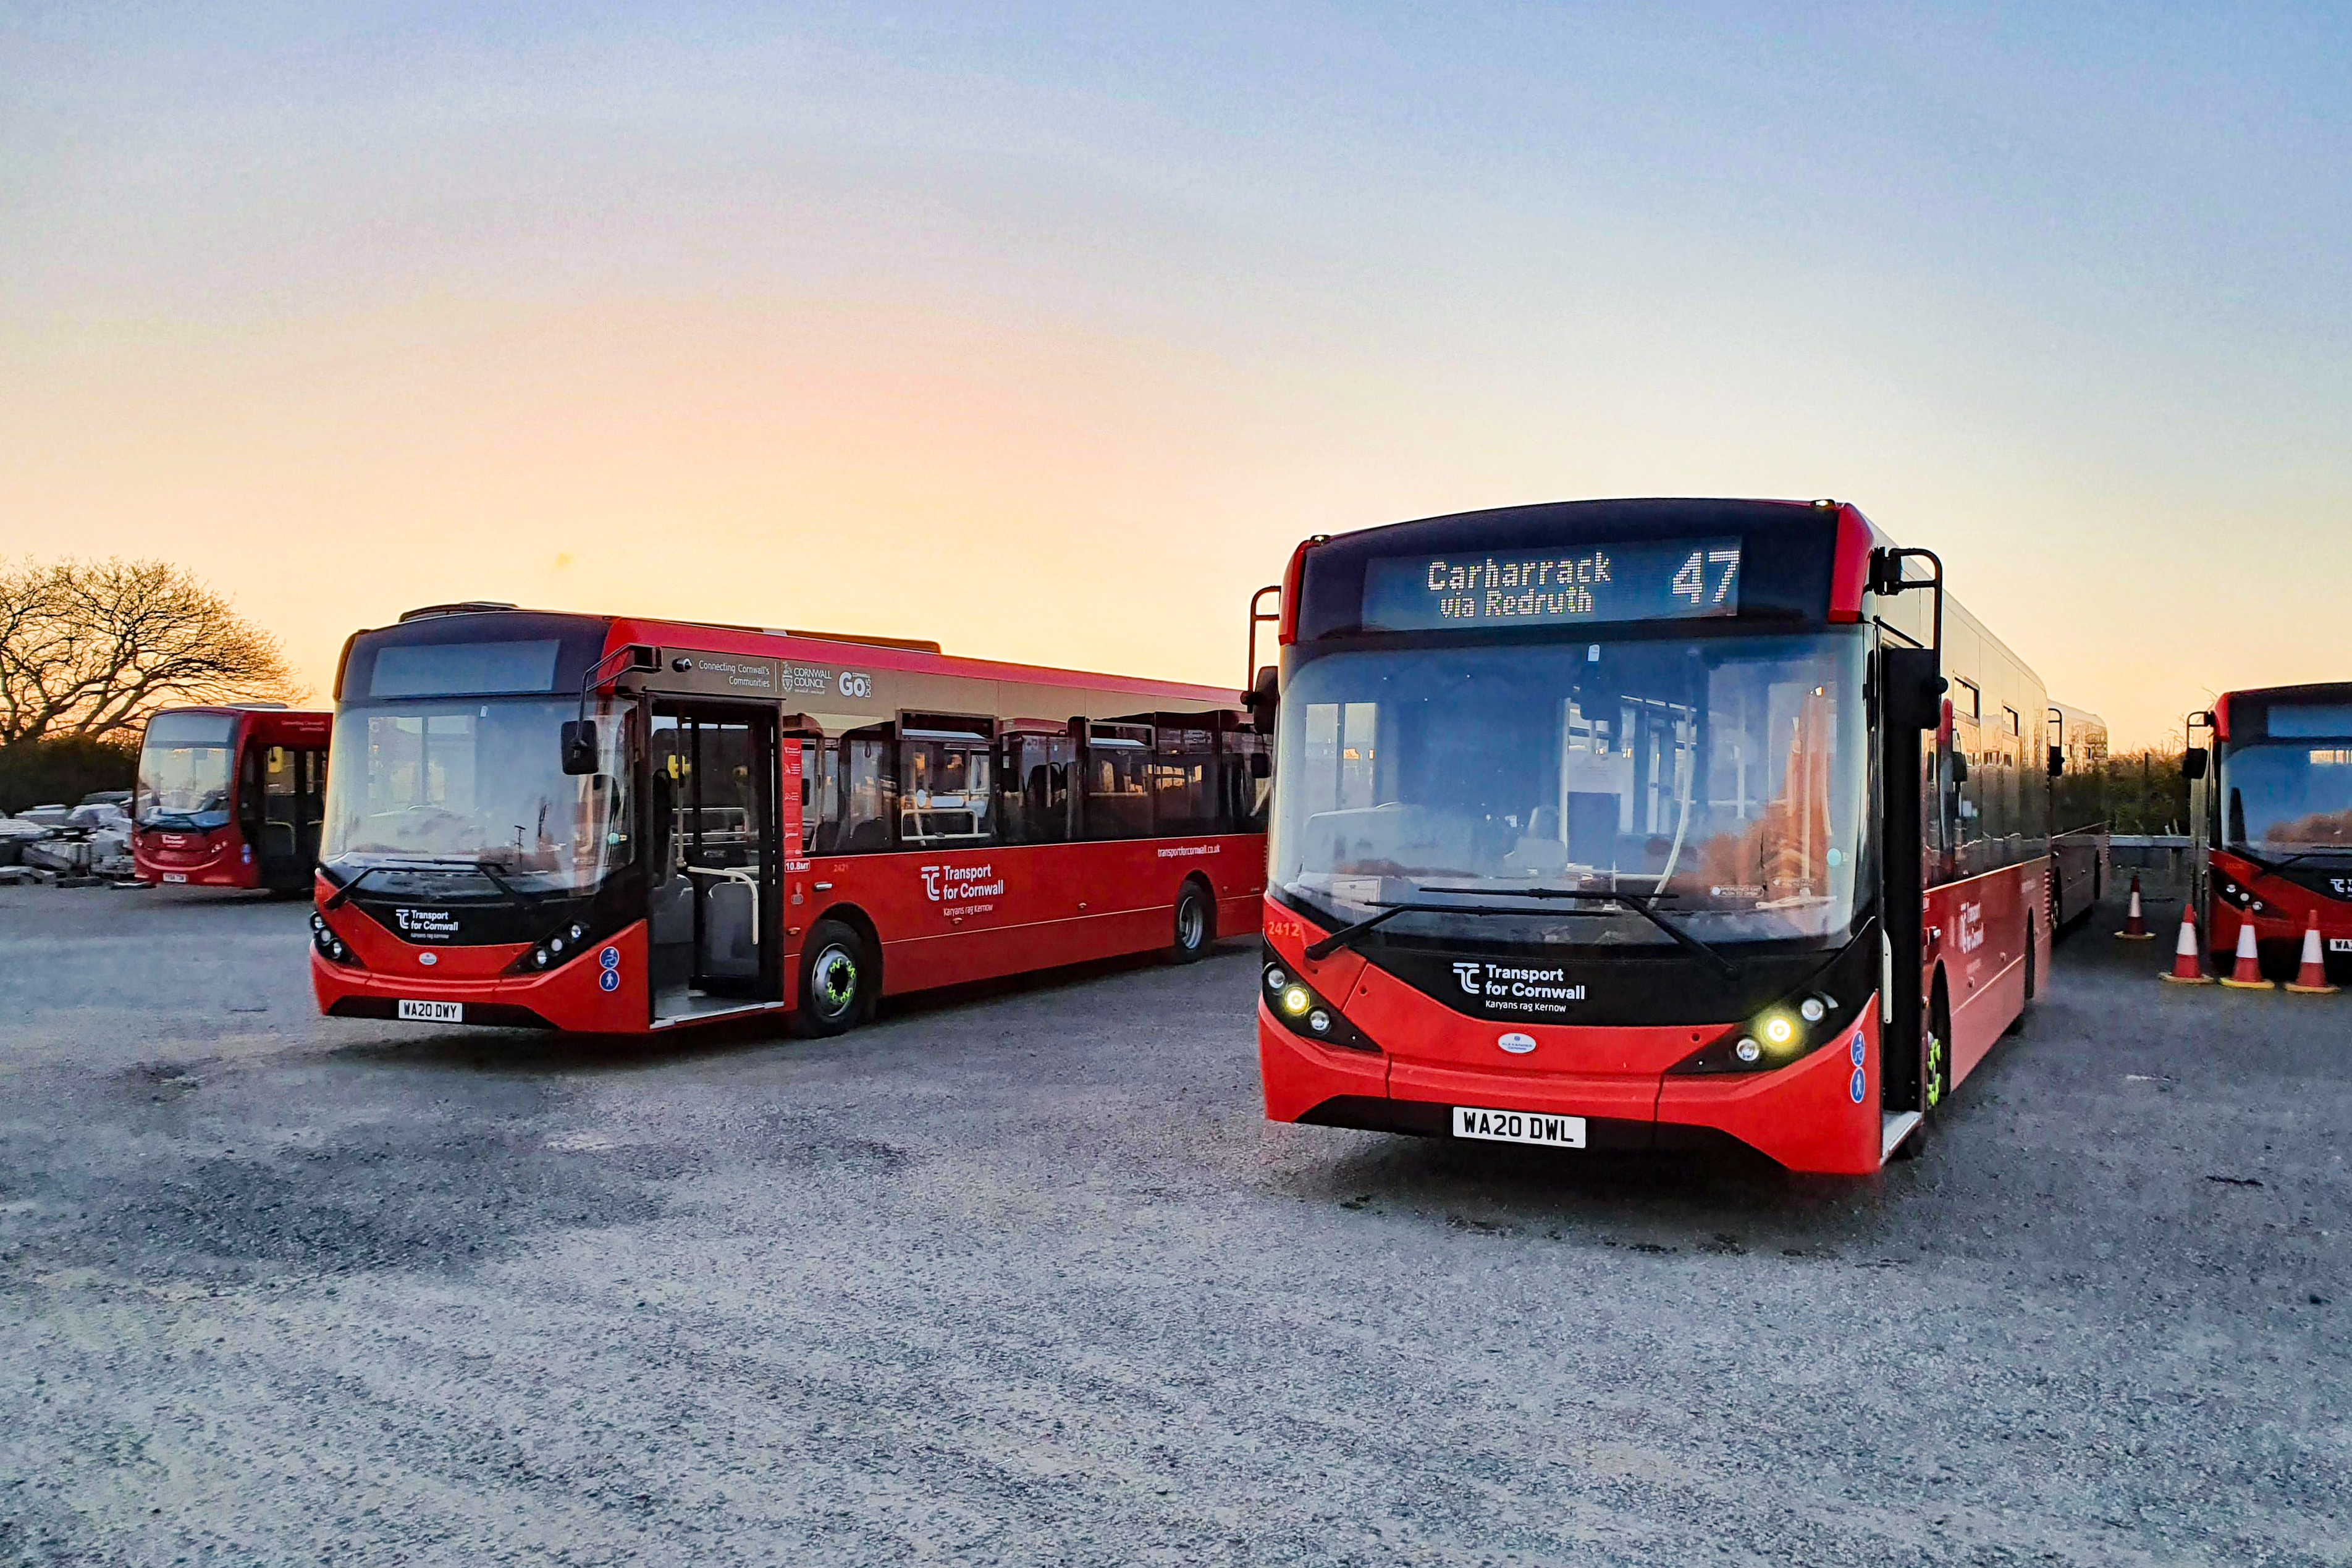 ADL delivering 92 buses to Go Cornwall